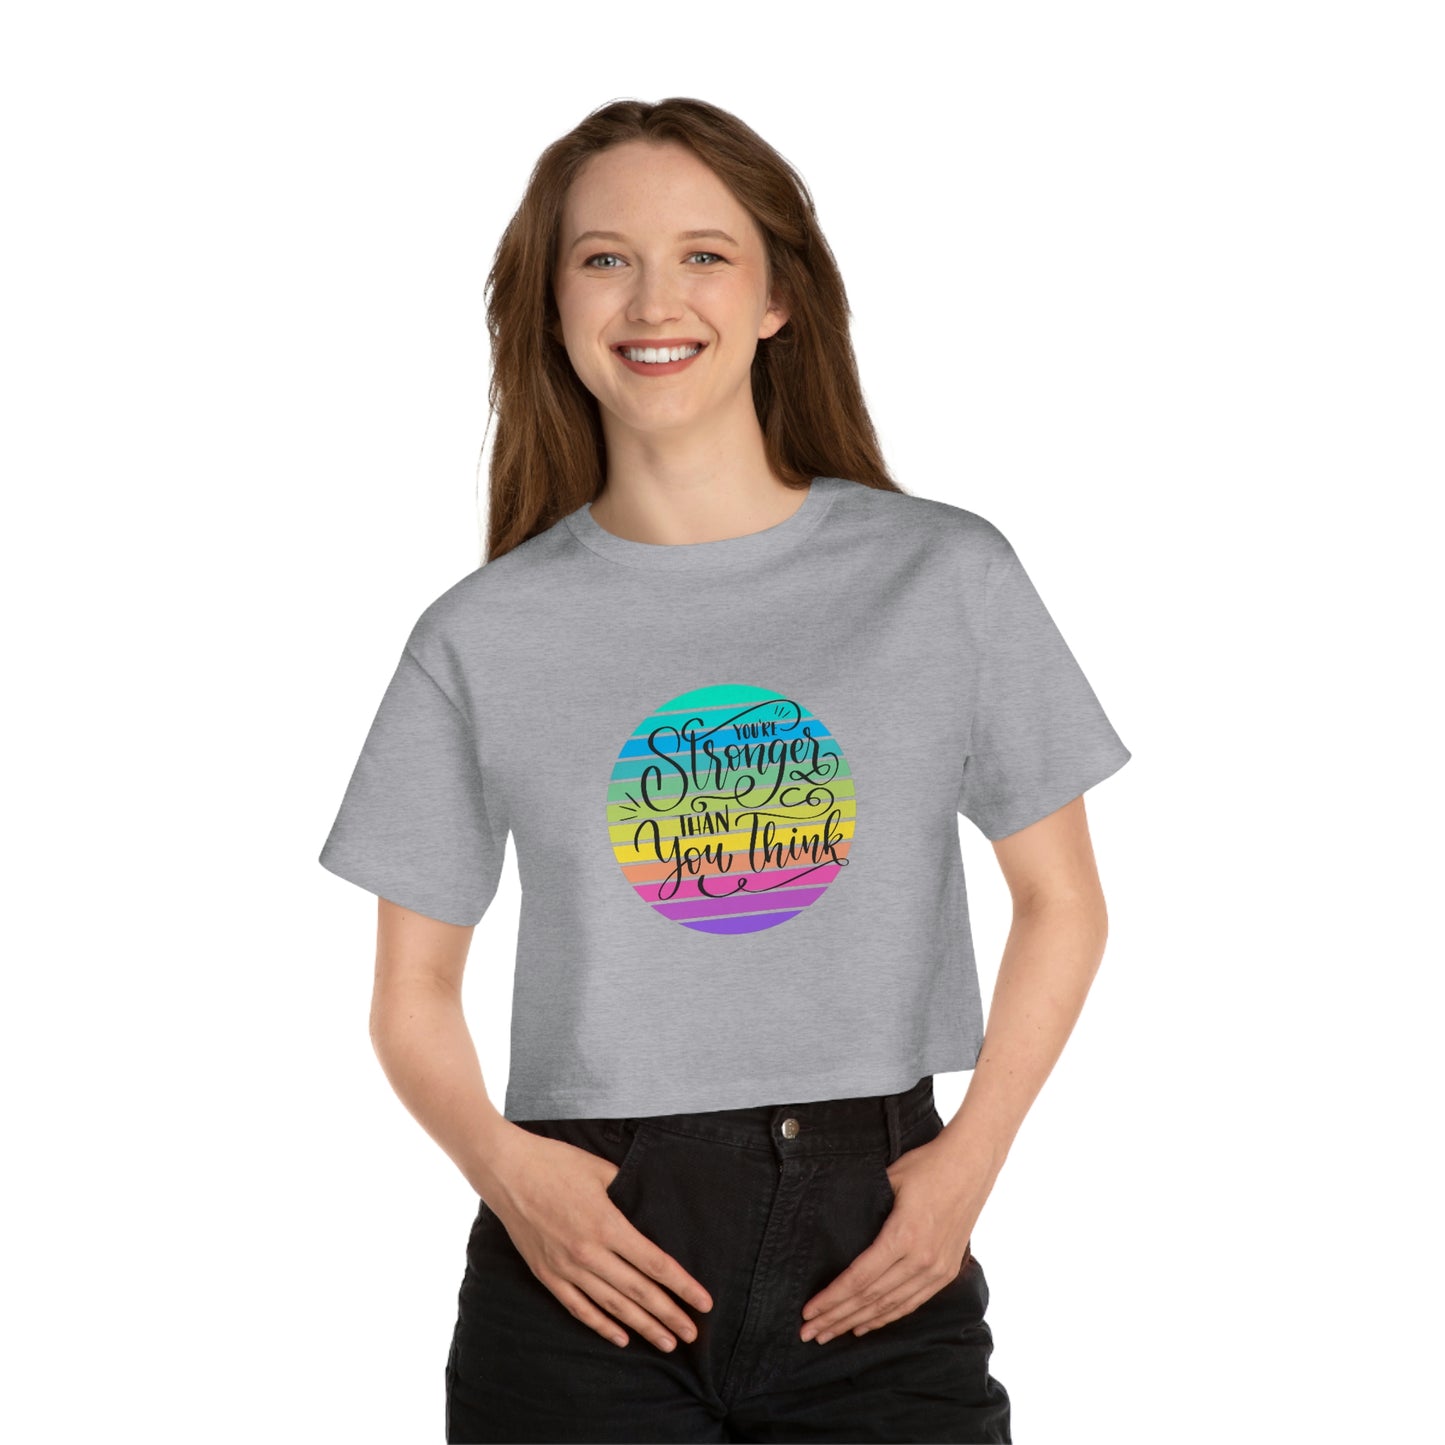 Champion Women's Heritage Cropped T-Shirt, POSITIVE THINKING, POSITIVE VIBES, MINDFULLNESS, GIFT FOR HER, STRONG LADY